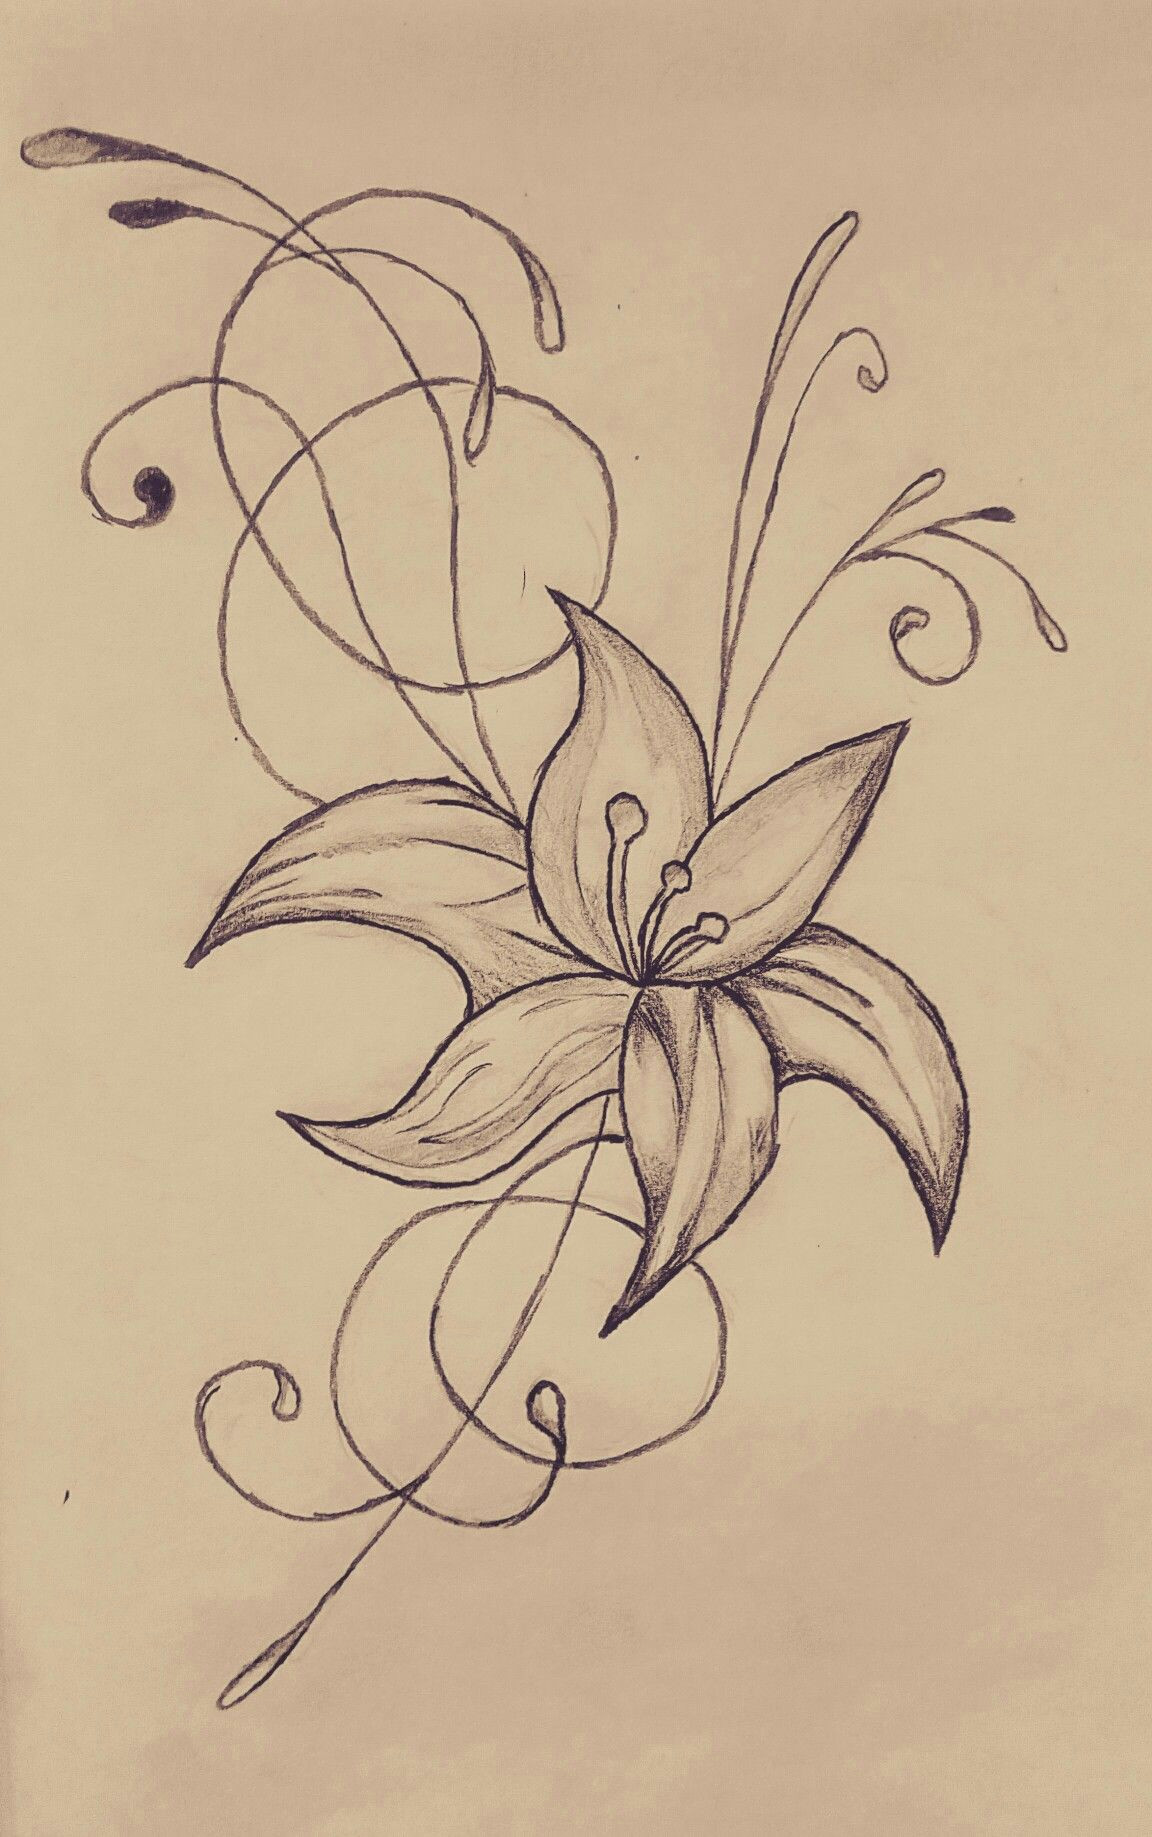 Drawings Of Small Flowers Small Flower My Drawings Pinterest